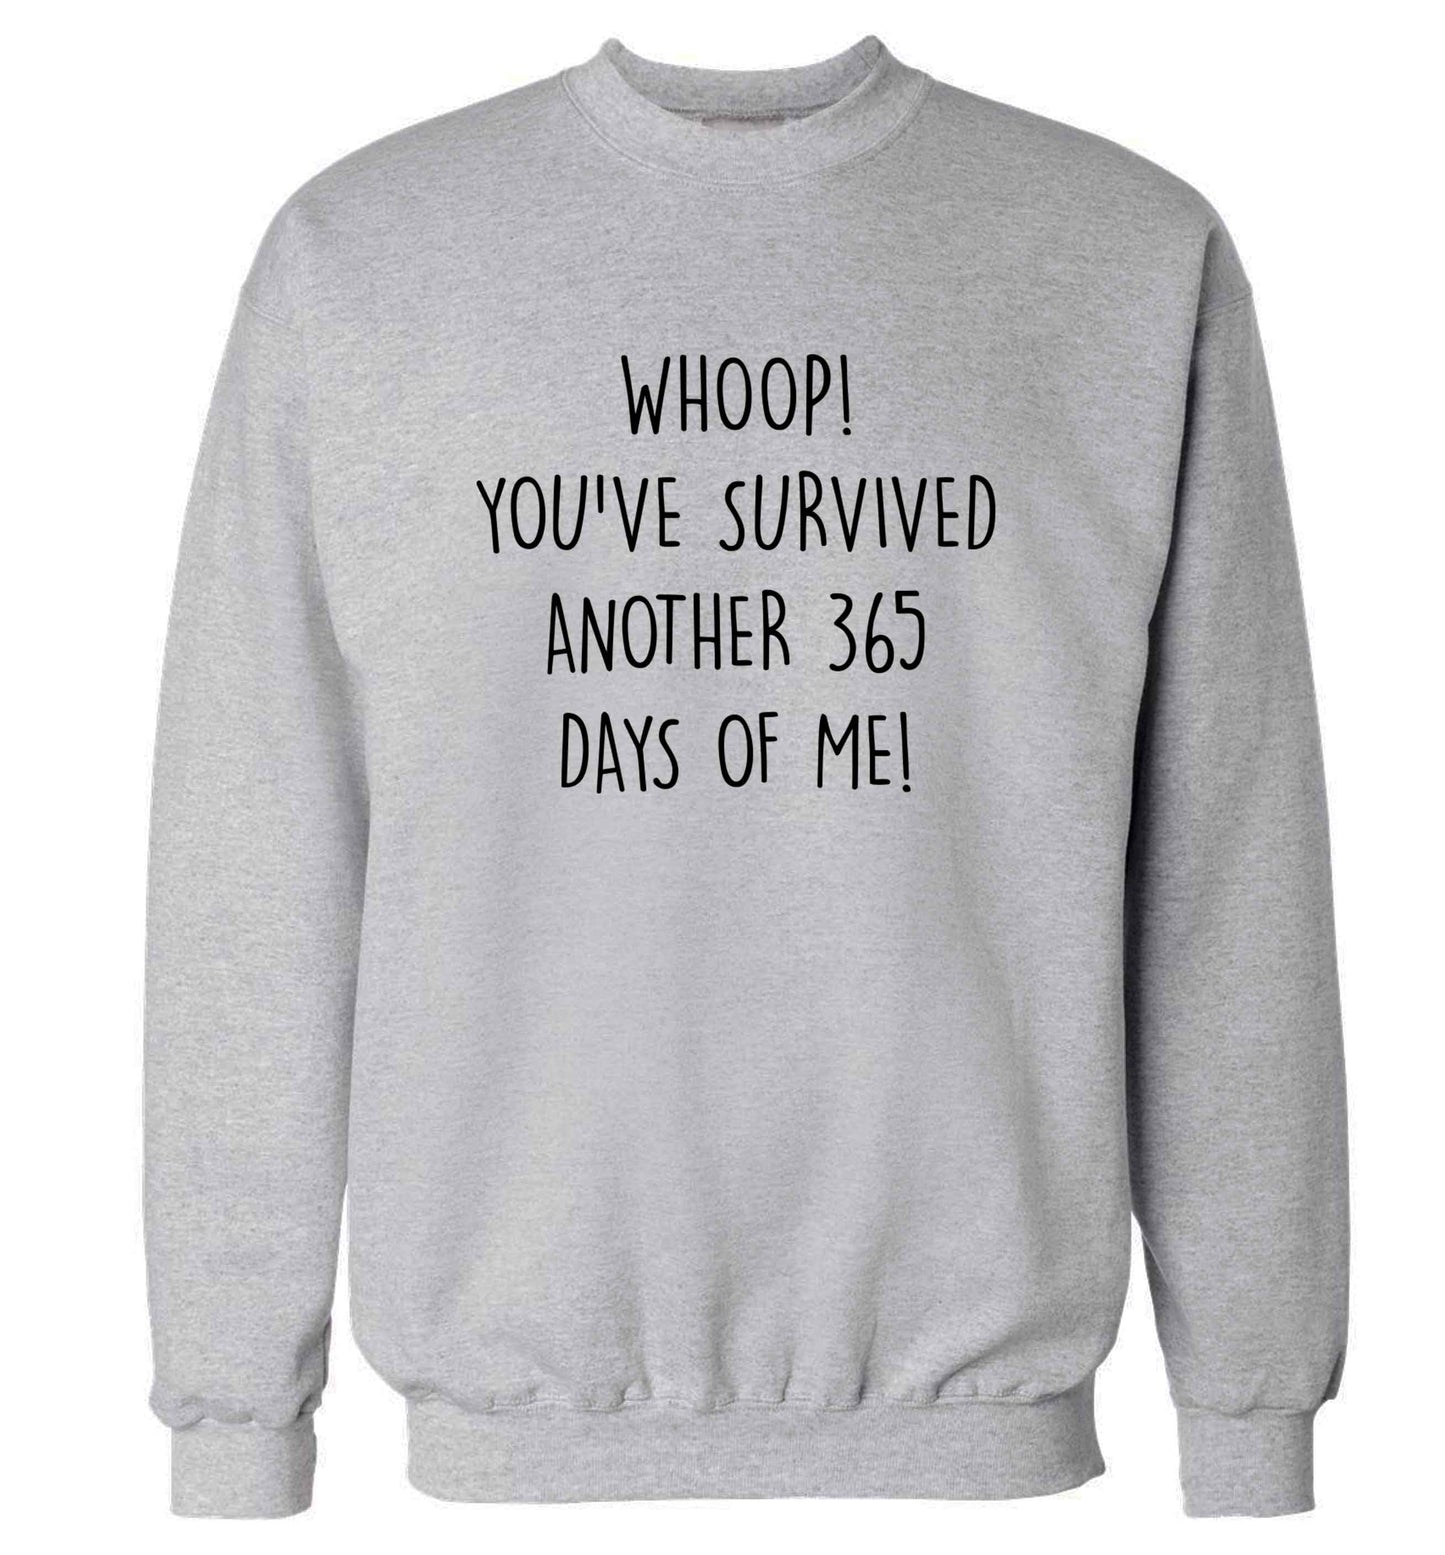 Whoop! You've survived another 365 days with me! adult's unisex grey sweater 2XL